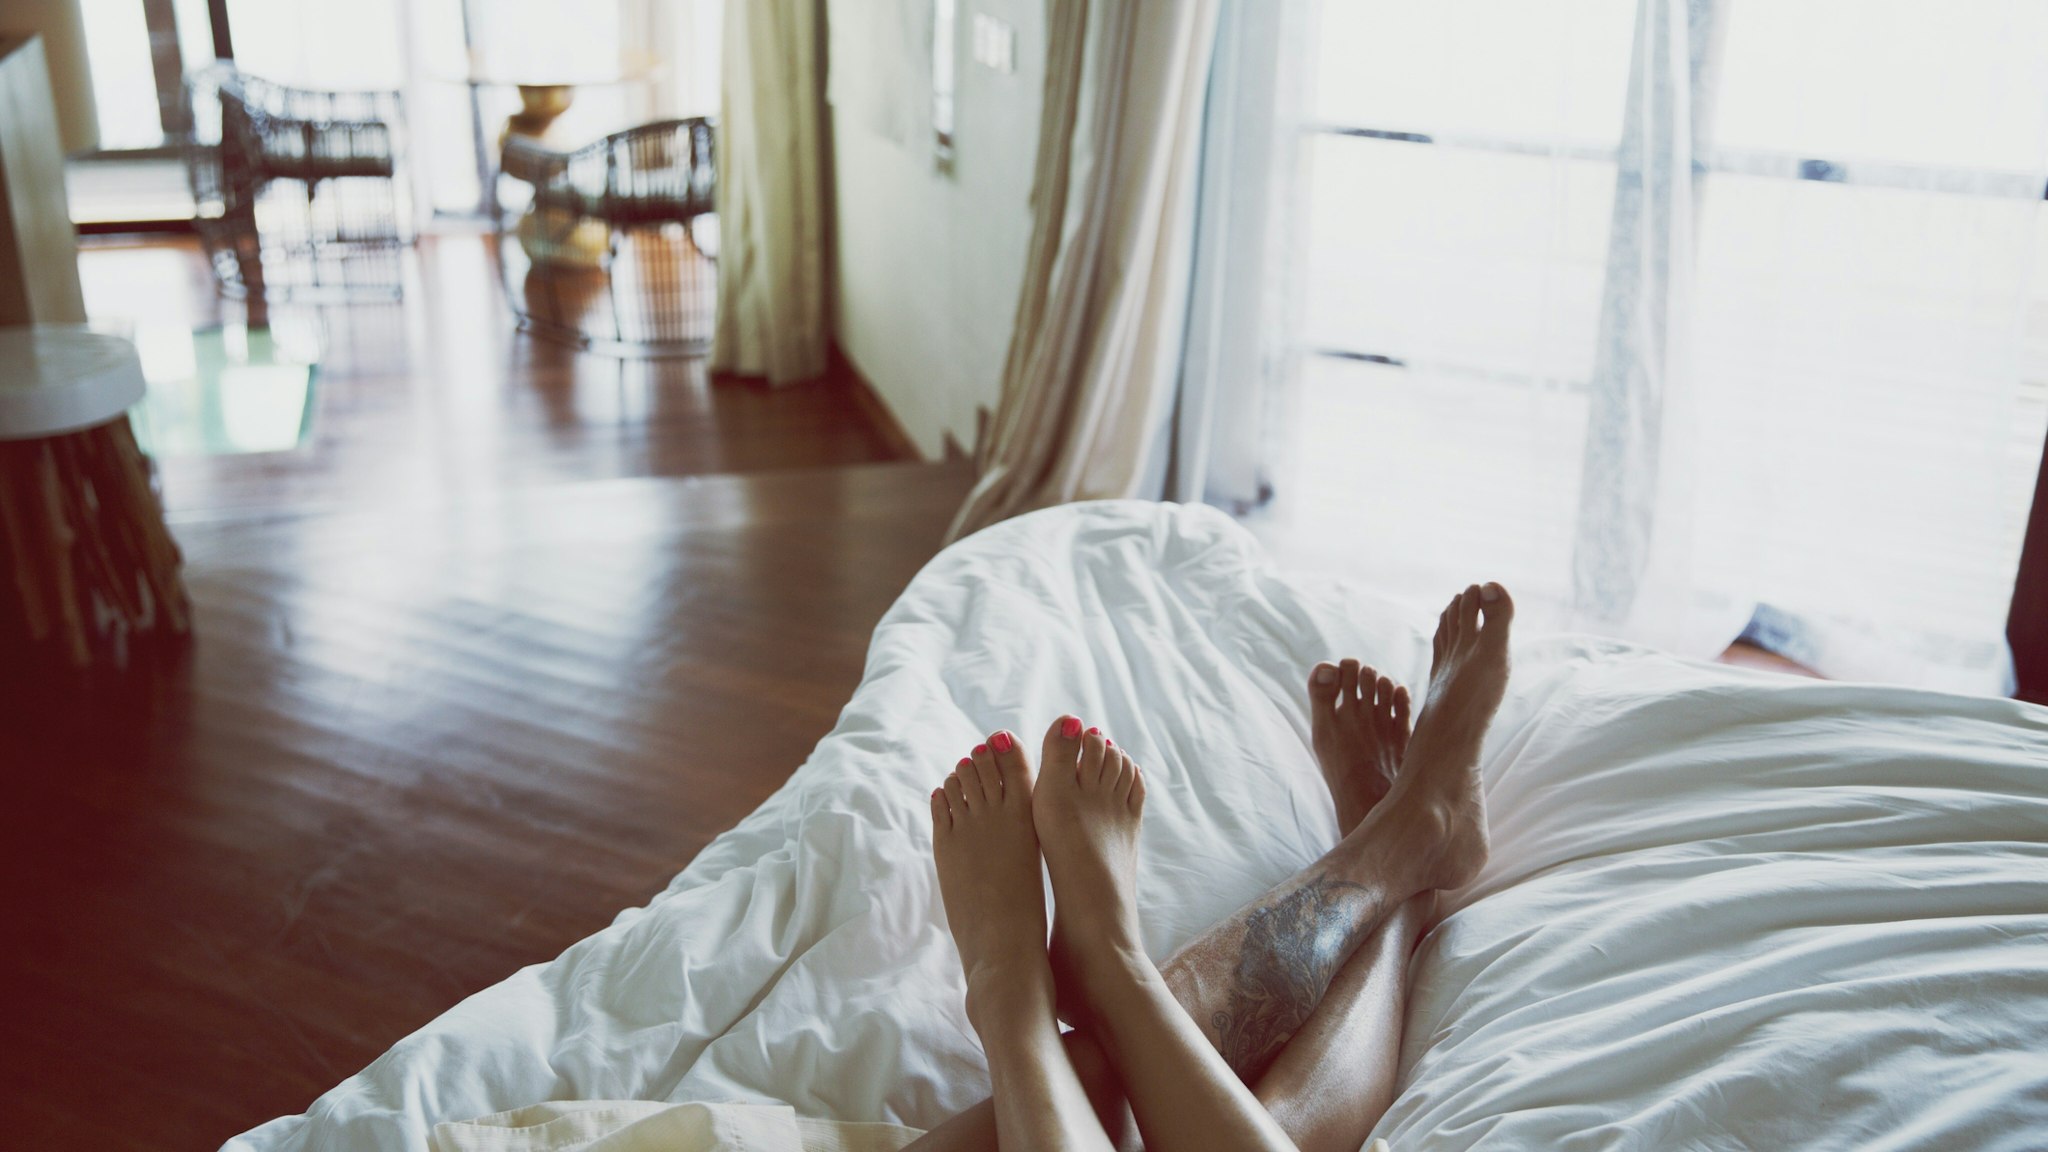 Couple In Bed - stock photo